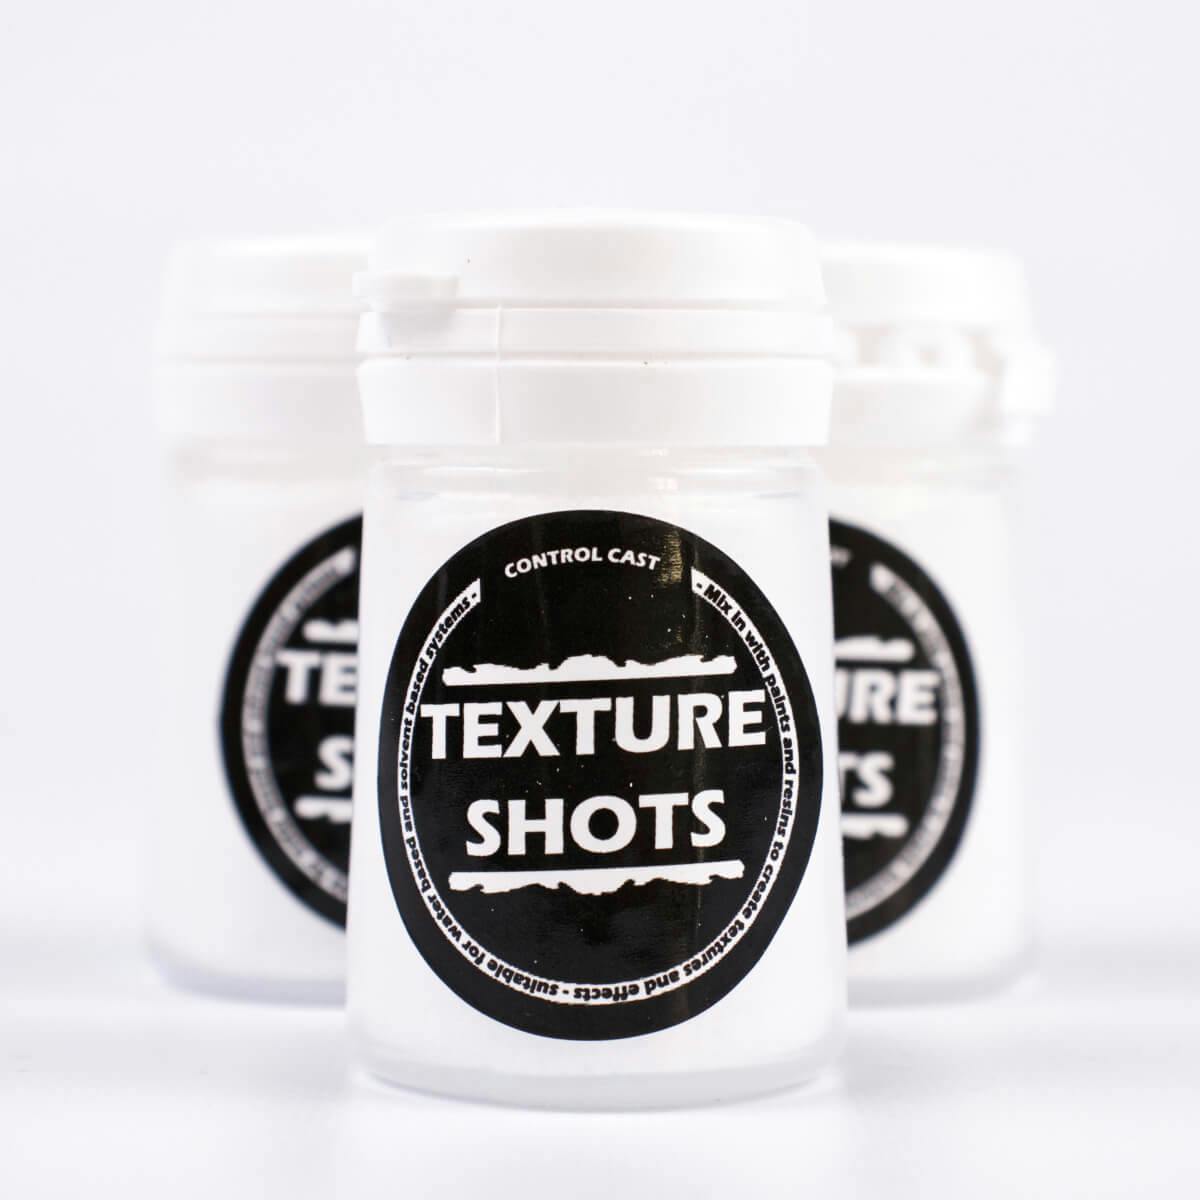 Small containers of Texture Shot powder